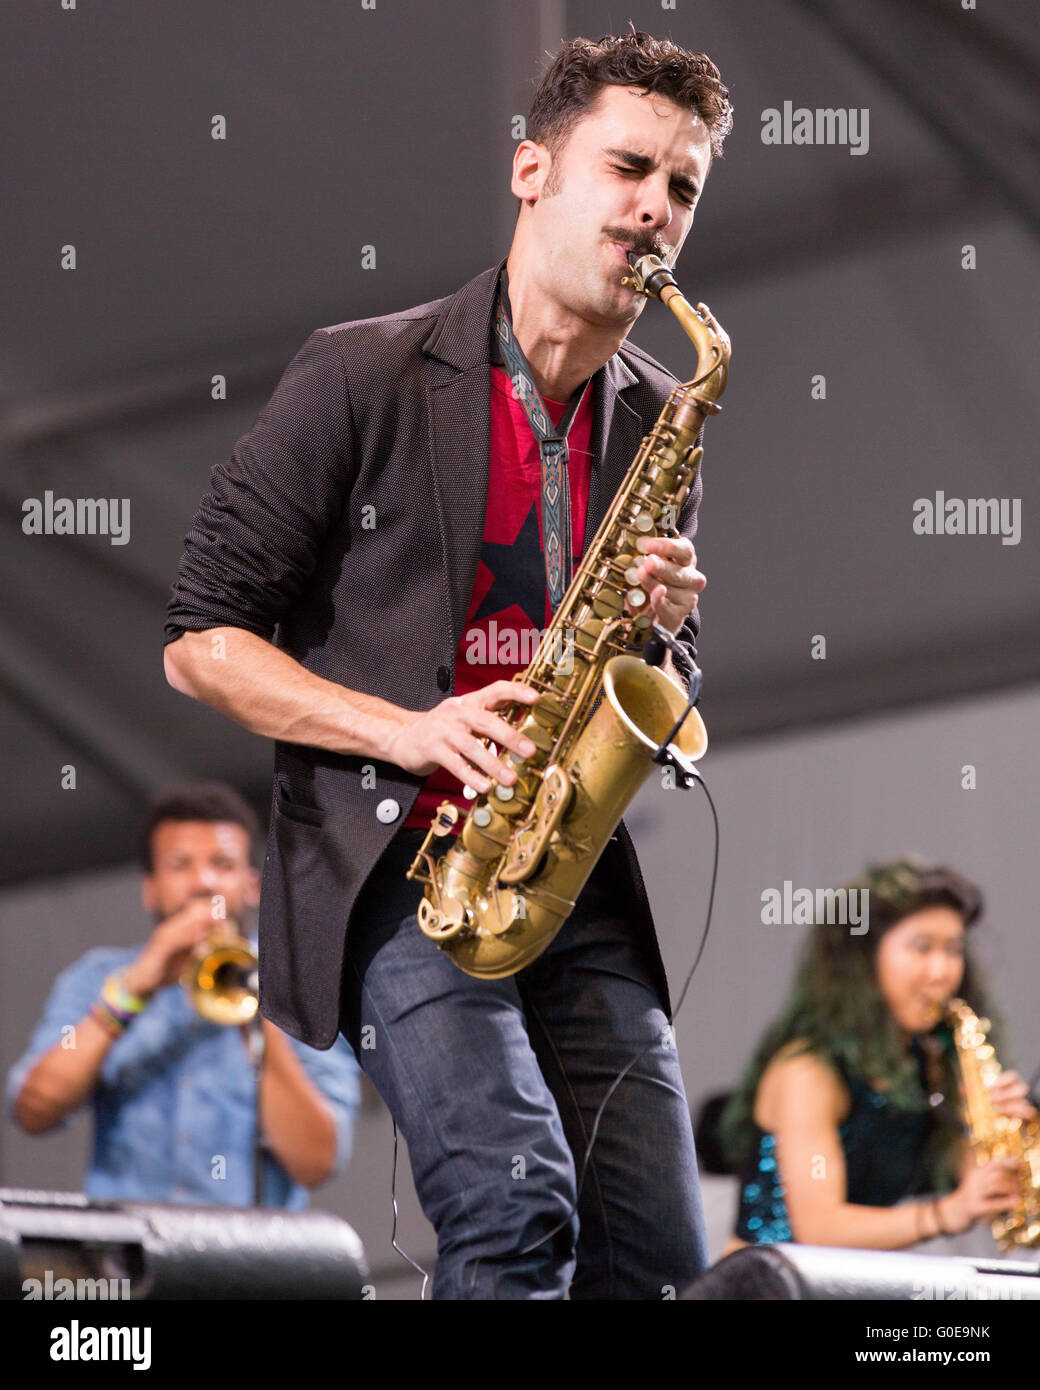 New Orleans, Louisiana, USA. 30th Apr, 2016. Musician EDDIE BARBASH of Stay Human performs live with Jon Batiste during the New Orleans Jazz & Heritage Festival at Fair Grounds Race Course in New Orleans, Louisiana © Daniel DeSlover/ZUMA Wire/Alamy Live News Stock Photo